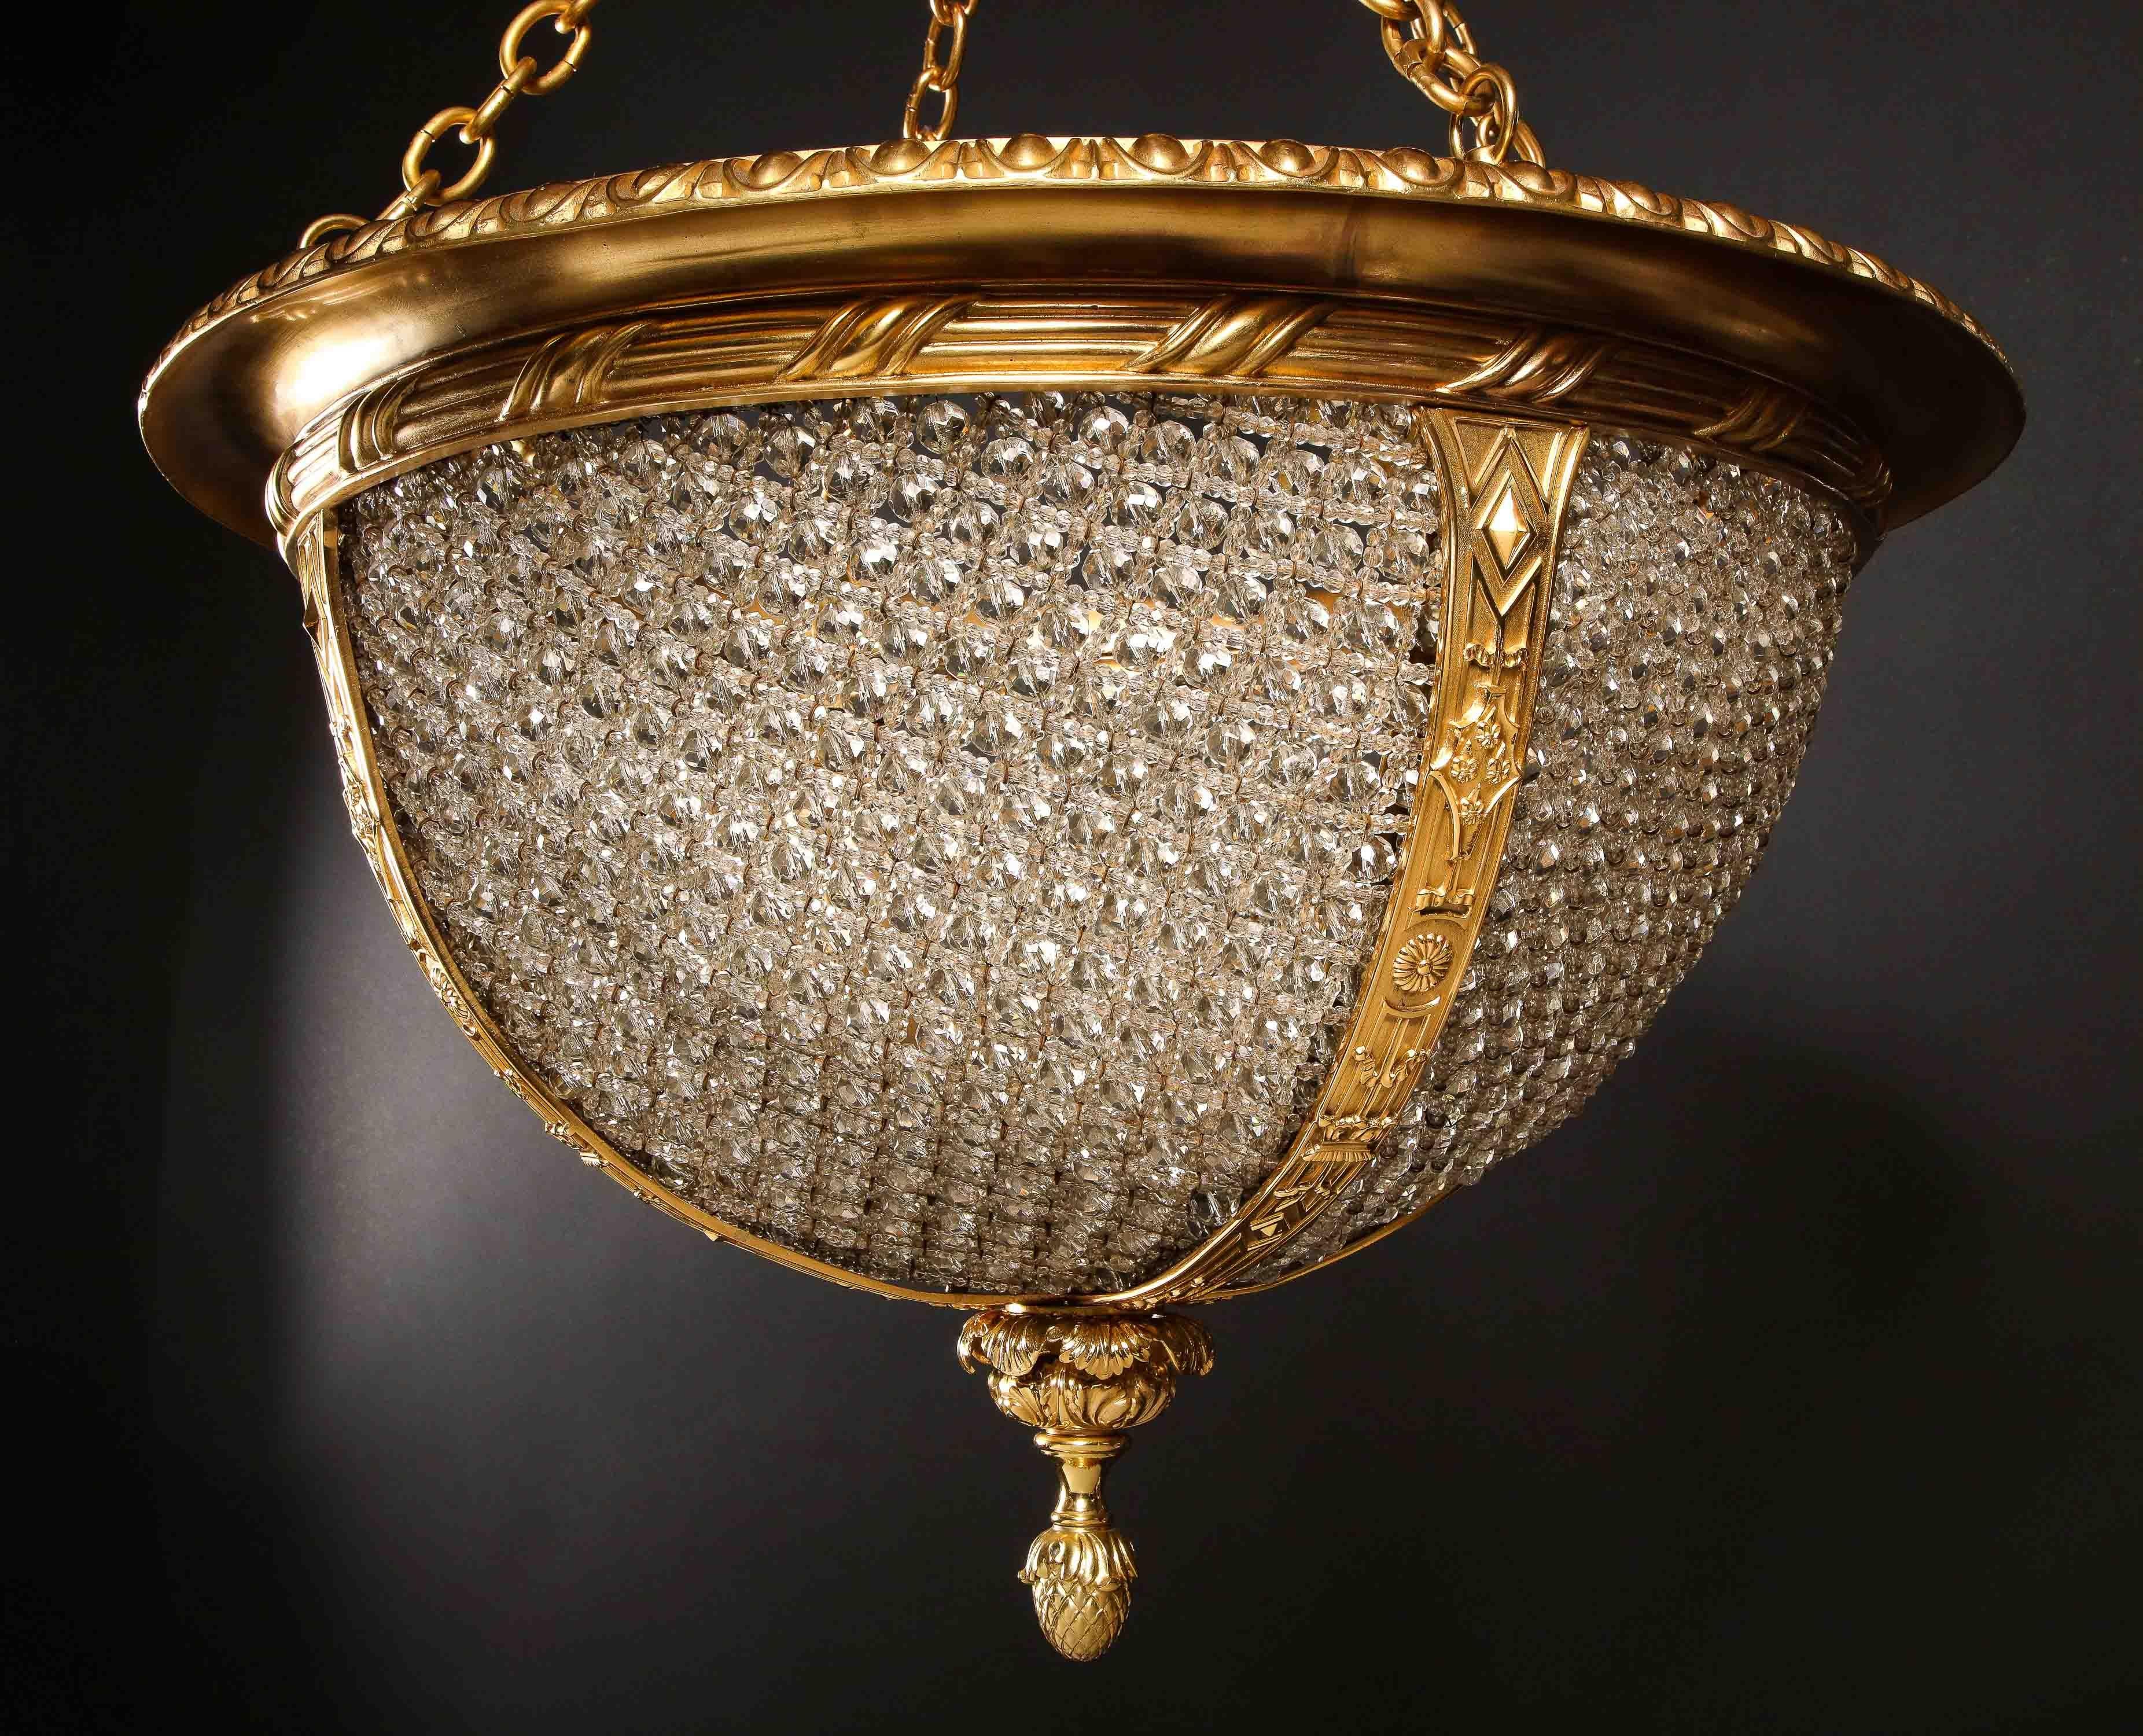 20th Century Hollywood Regency Gilt Bronze and beaded glass Circular Chandelier For Sale